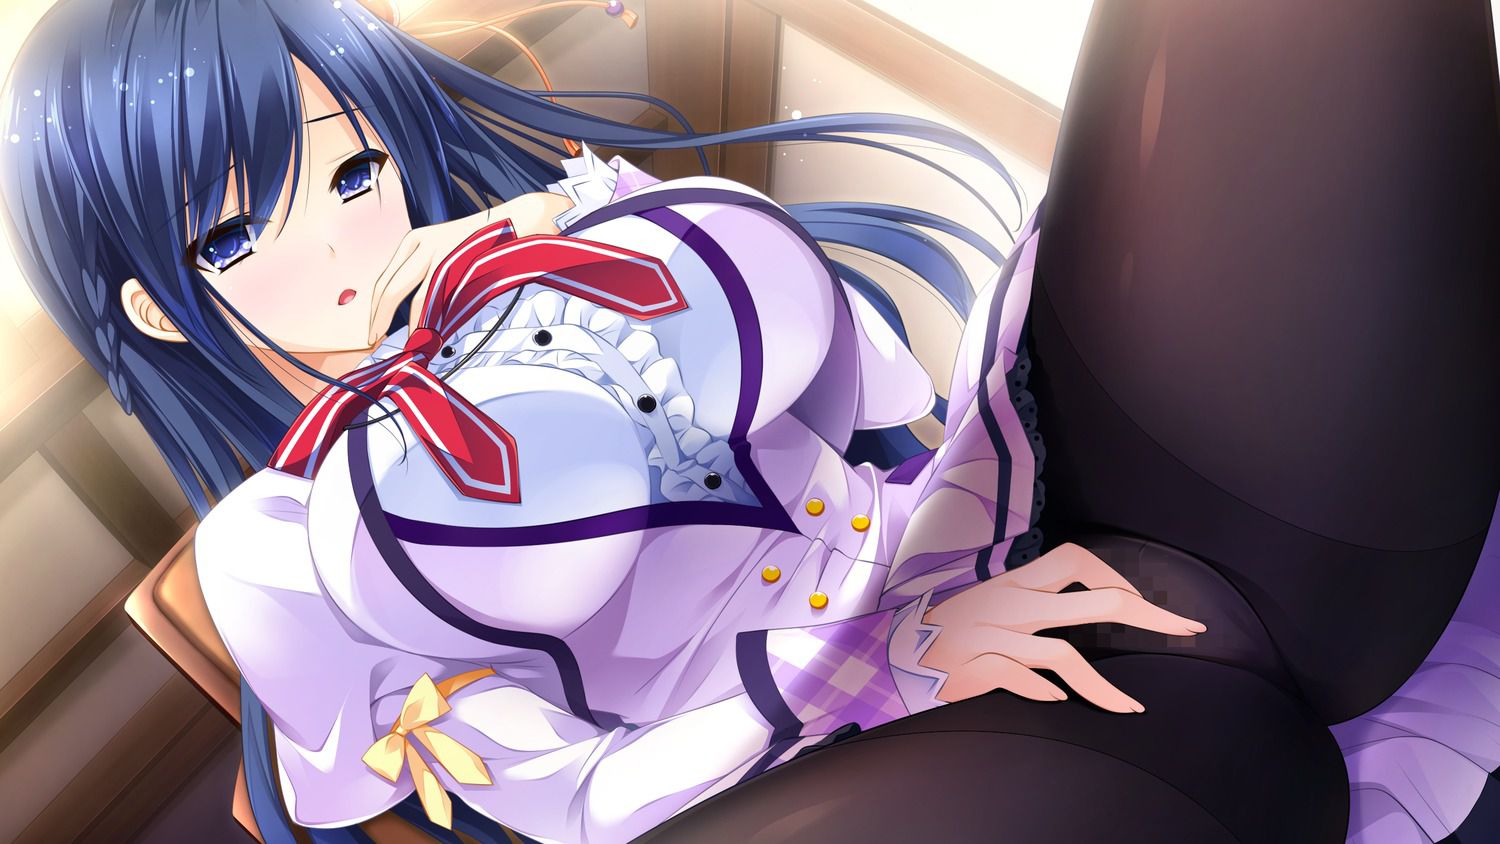 Essence of love decorate the maiden [18 eroge HCG] erotic pictures 2